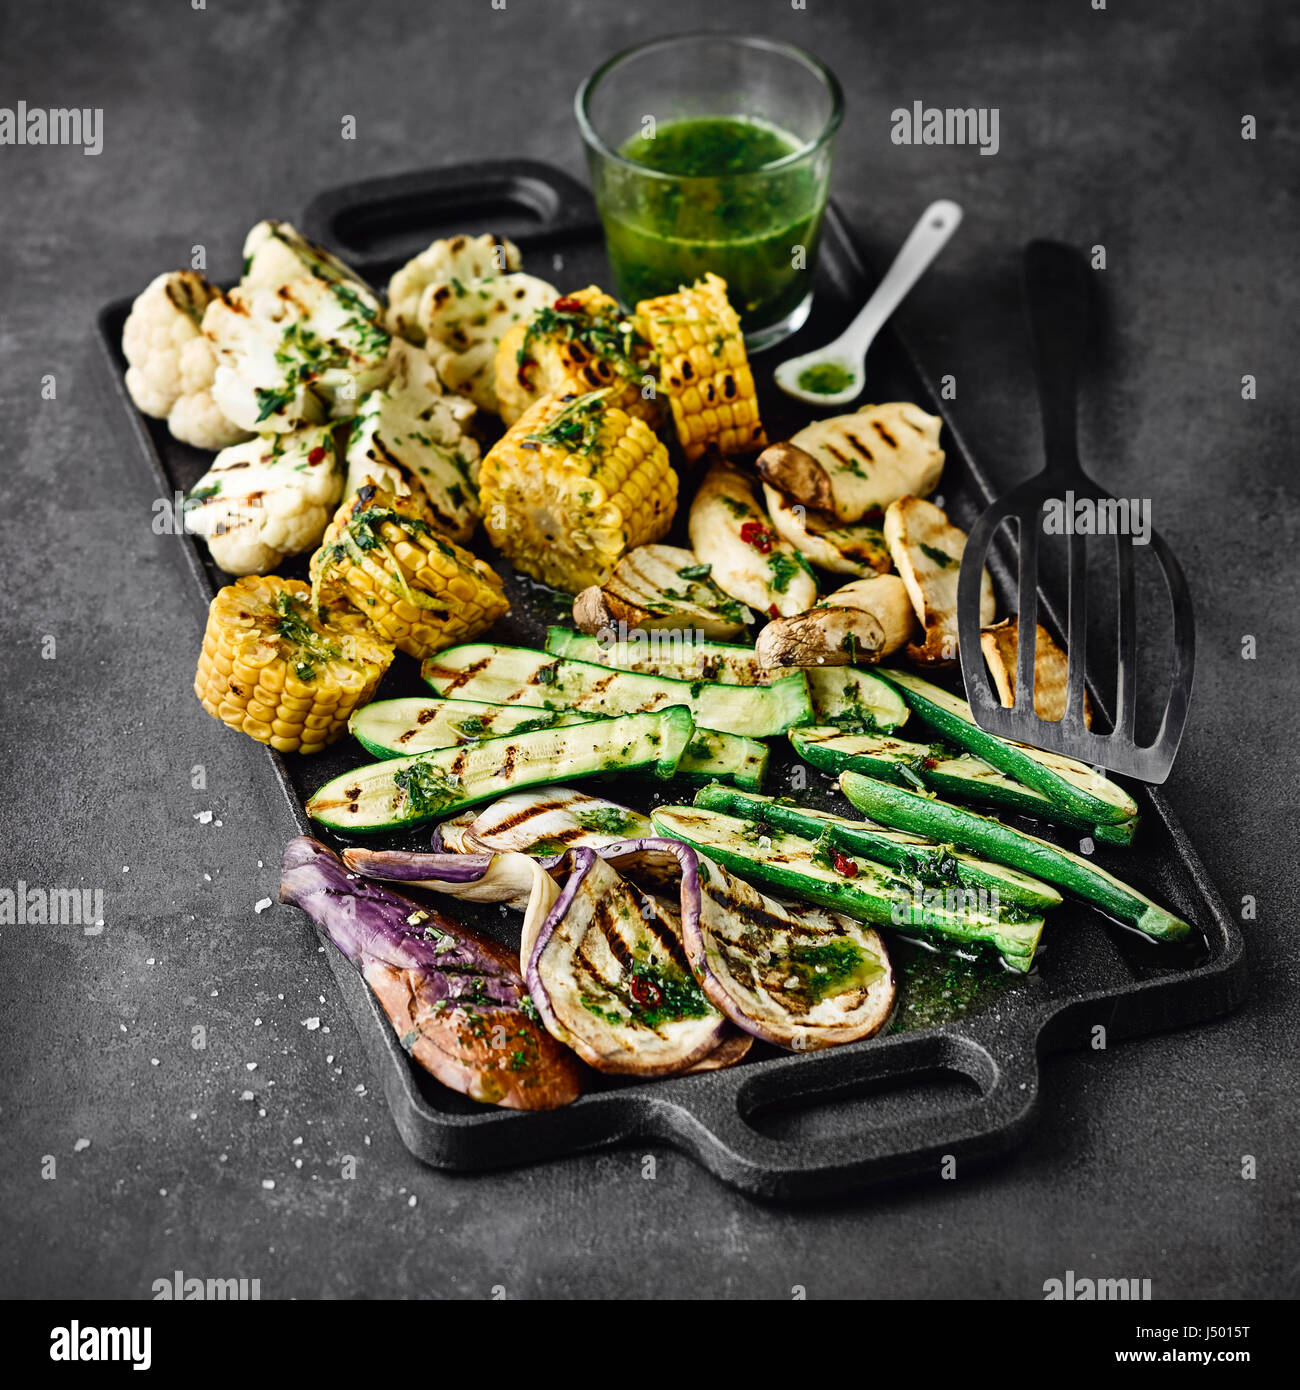 Grilled vegetables with herbal chili garlic oil Stock Photo